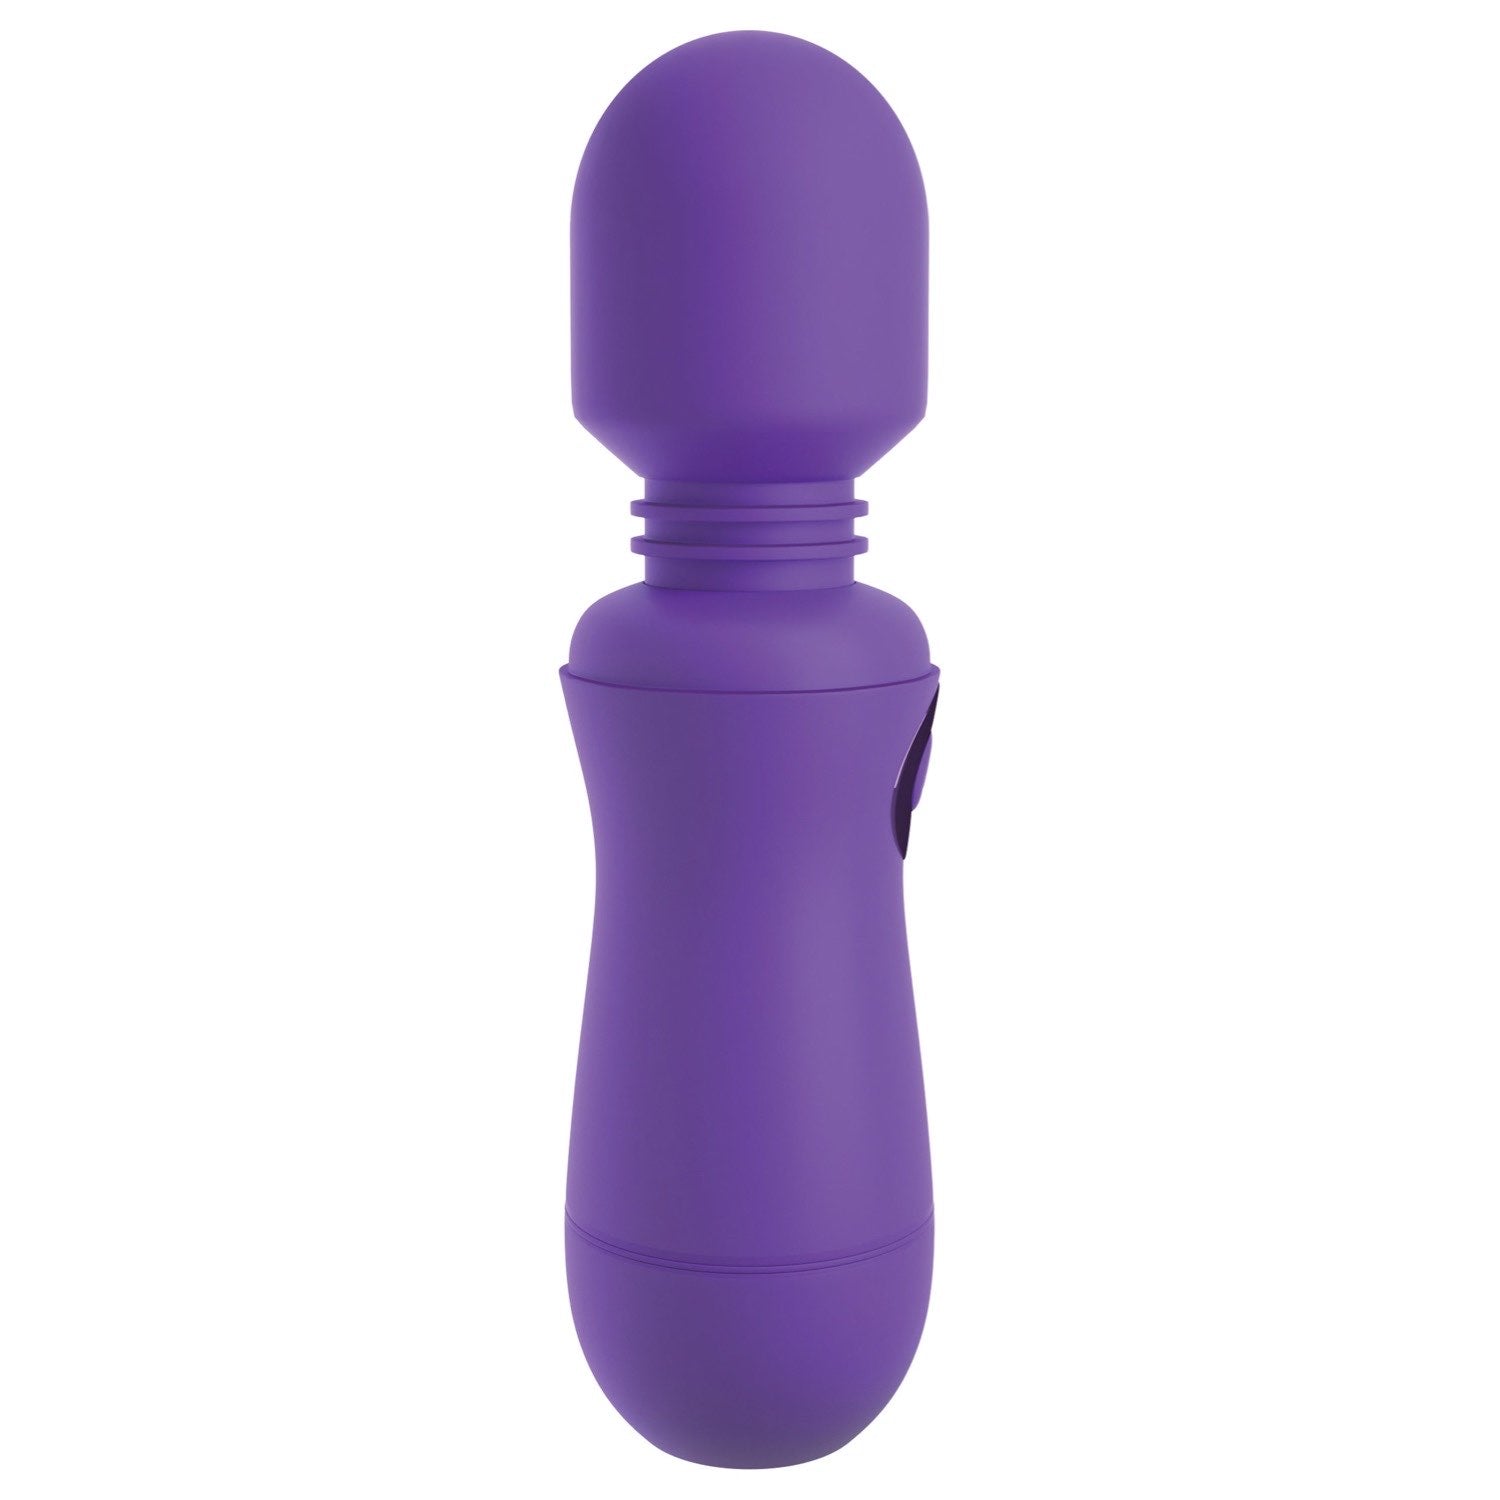 Omg! OMG! Wands #Enjoy - Purple USB Rechargeable Massager Wand by Pipedream